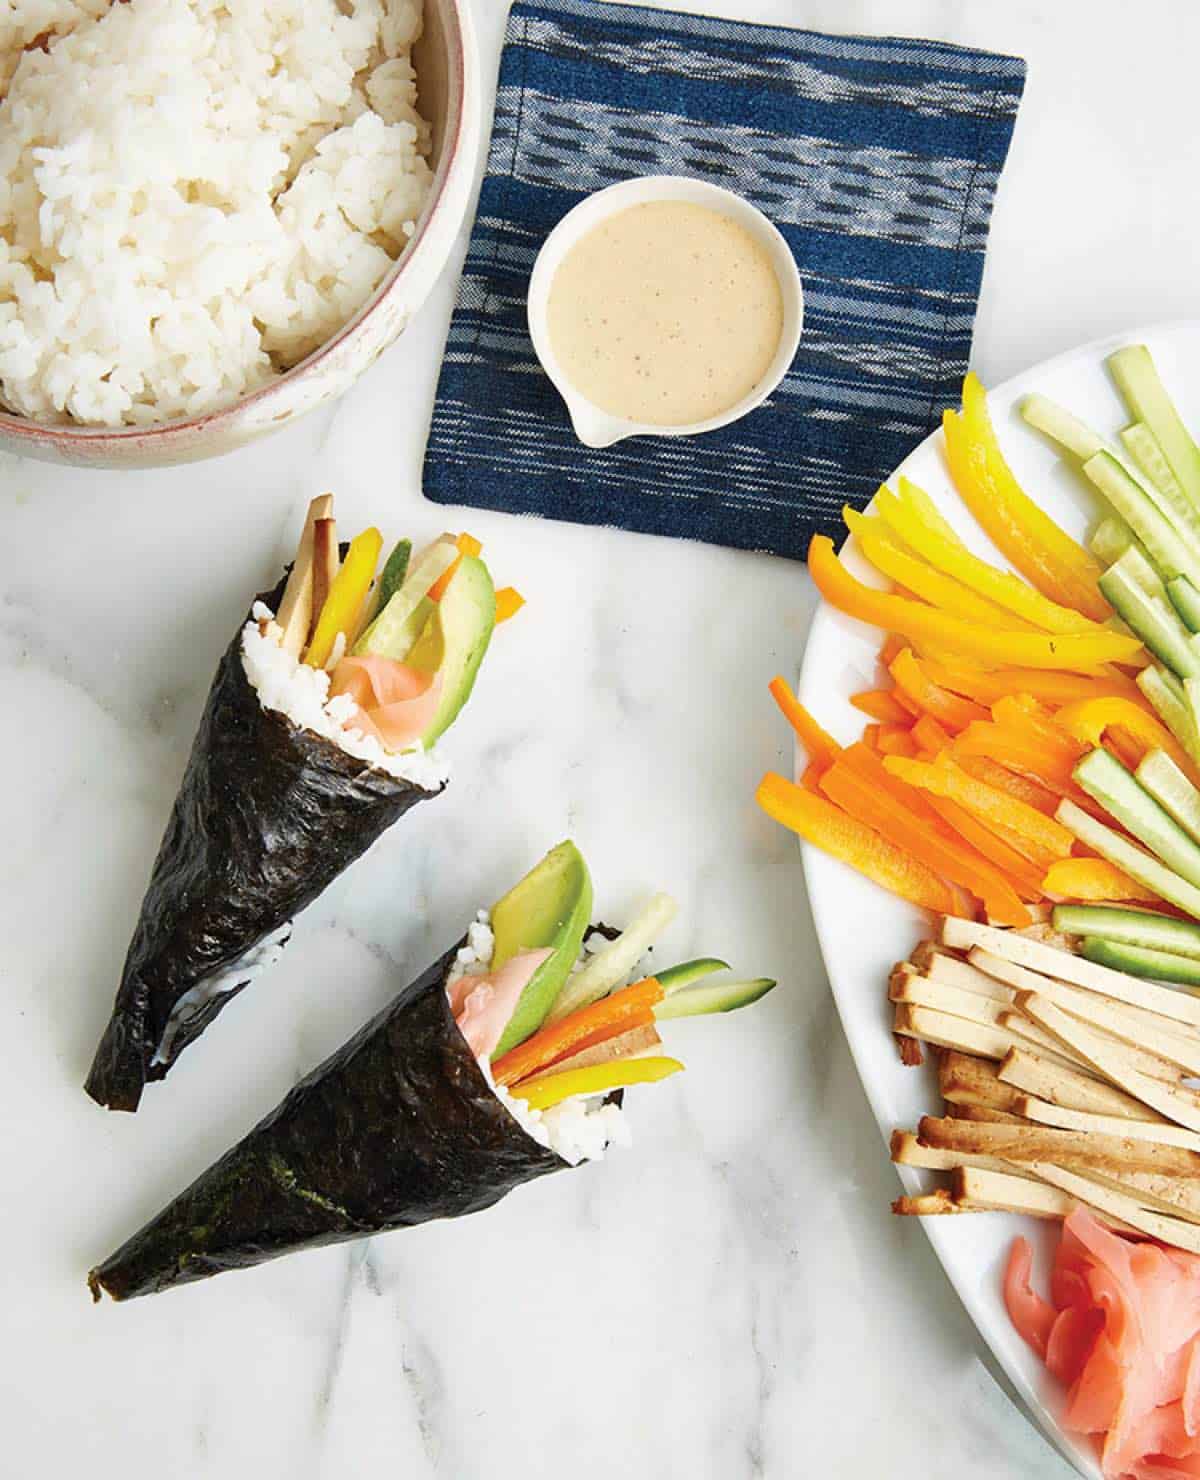 Vegan sushi hand rolls with baked tofu and veggies on a table with rice.